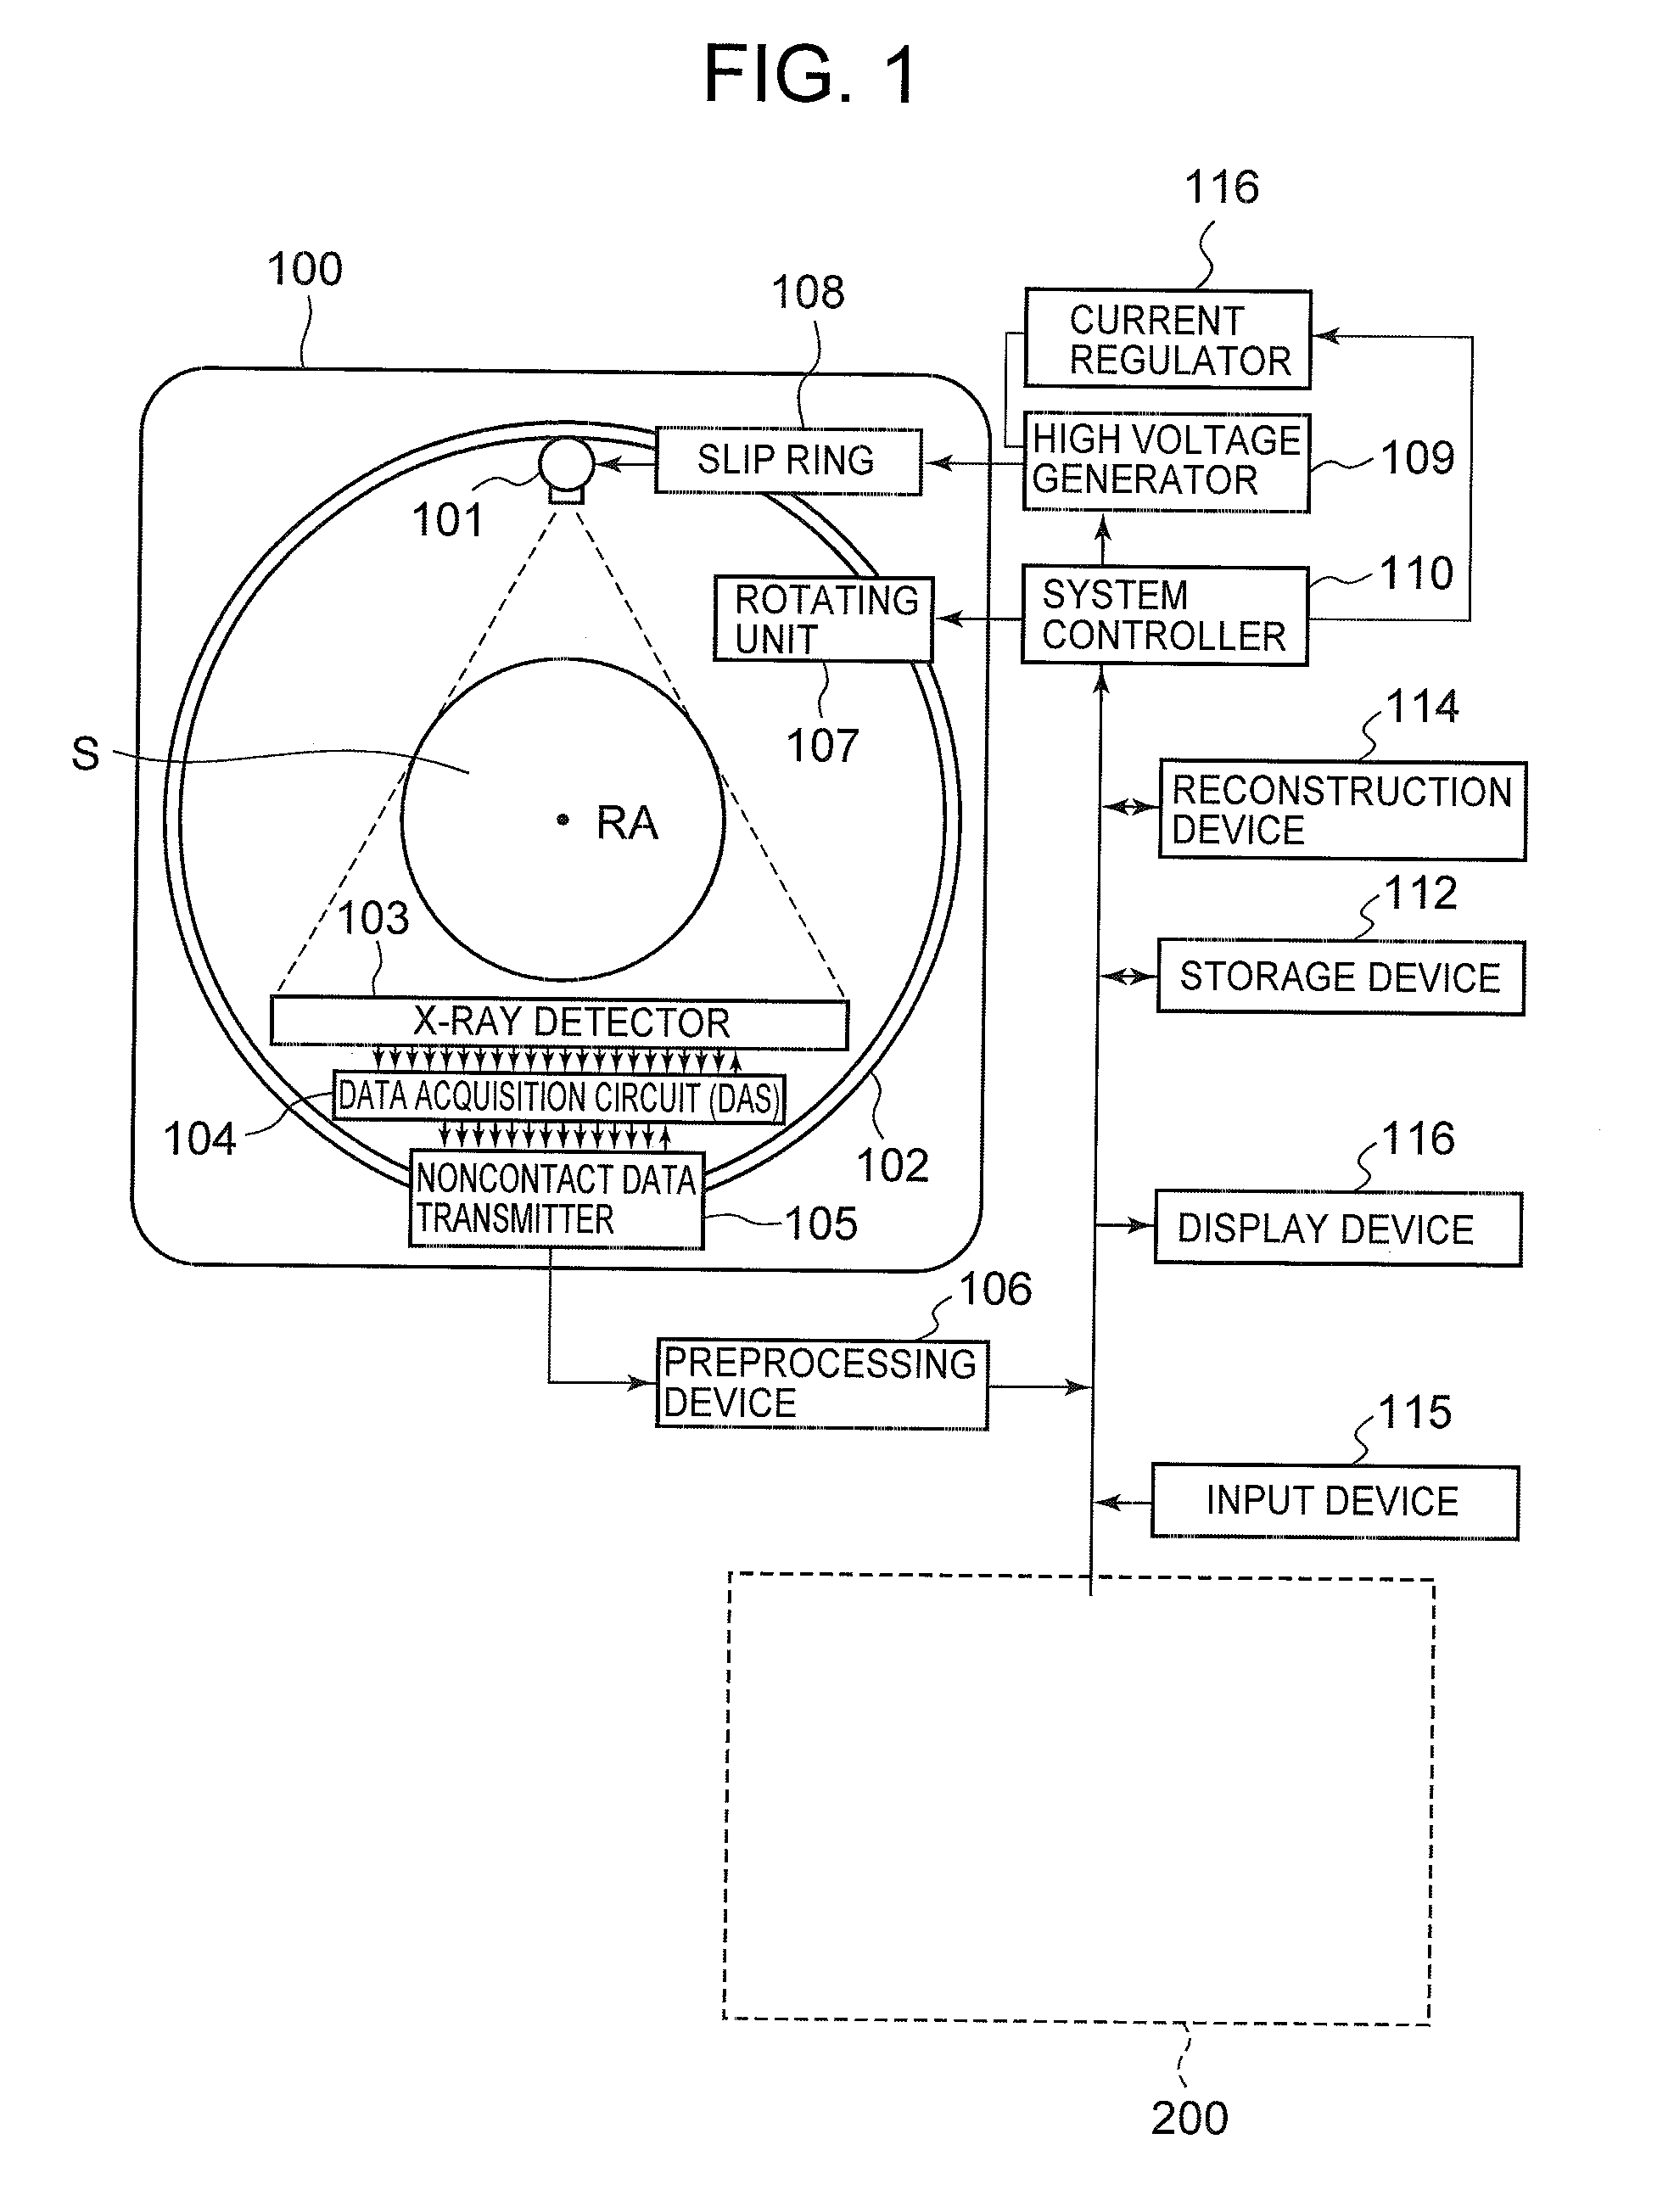 Voltage modulation in dual energy computed tomography